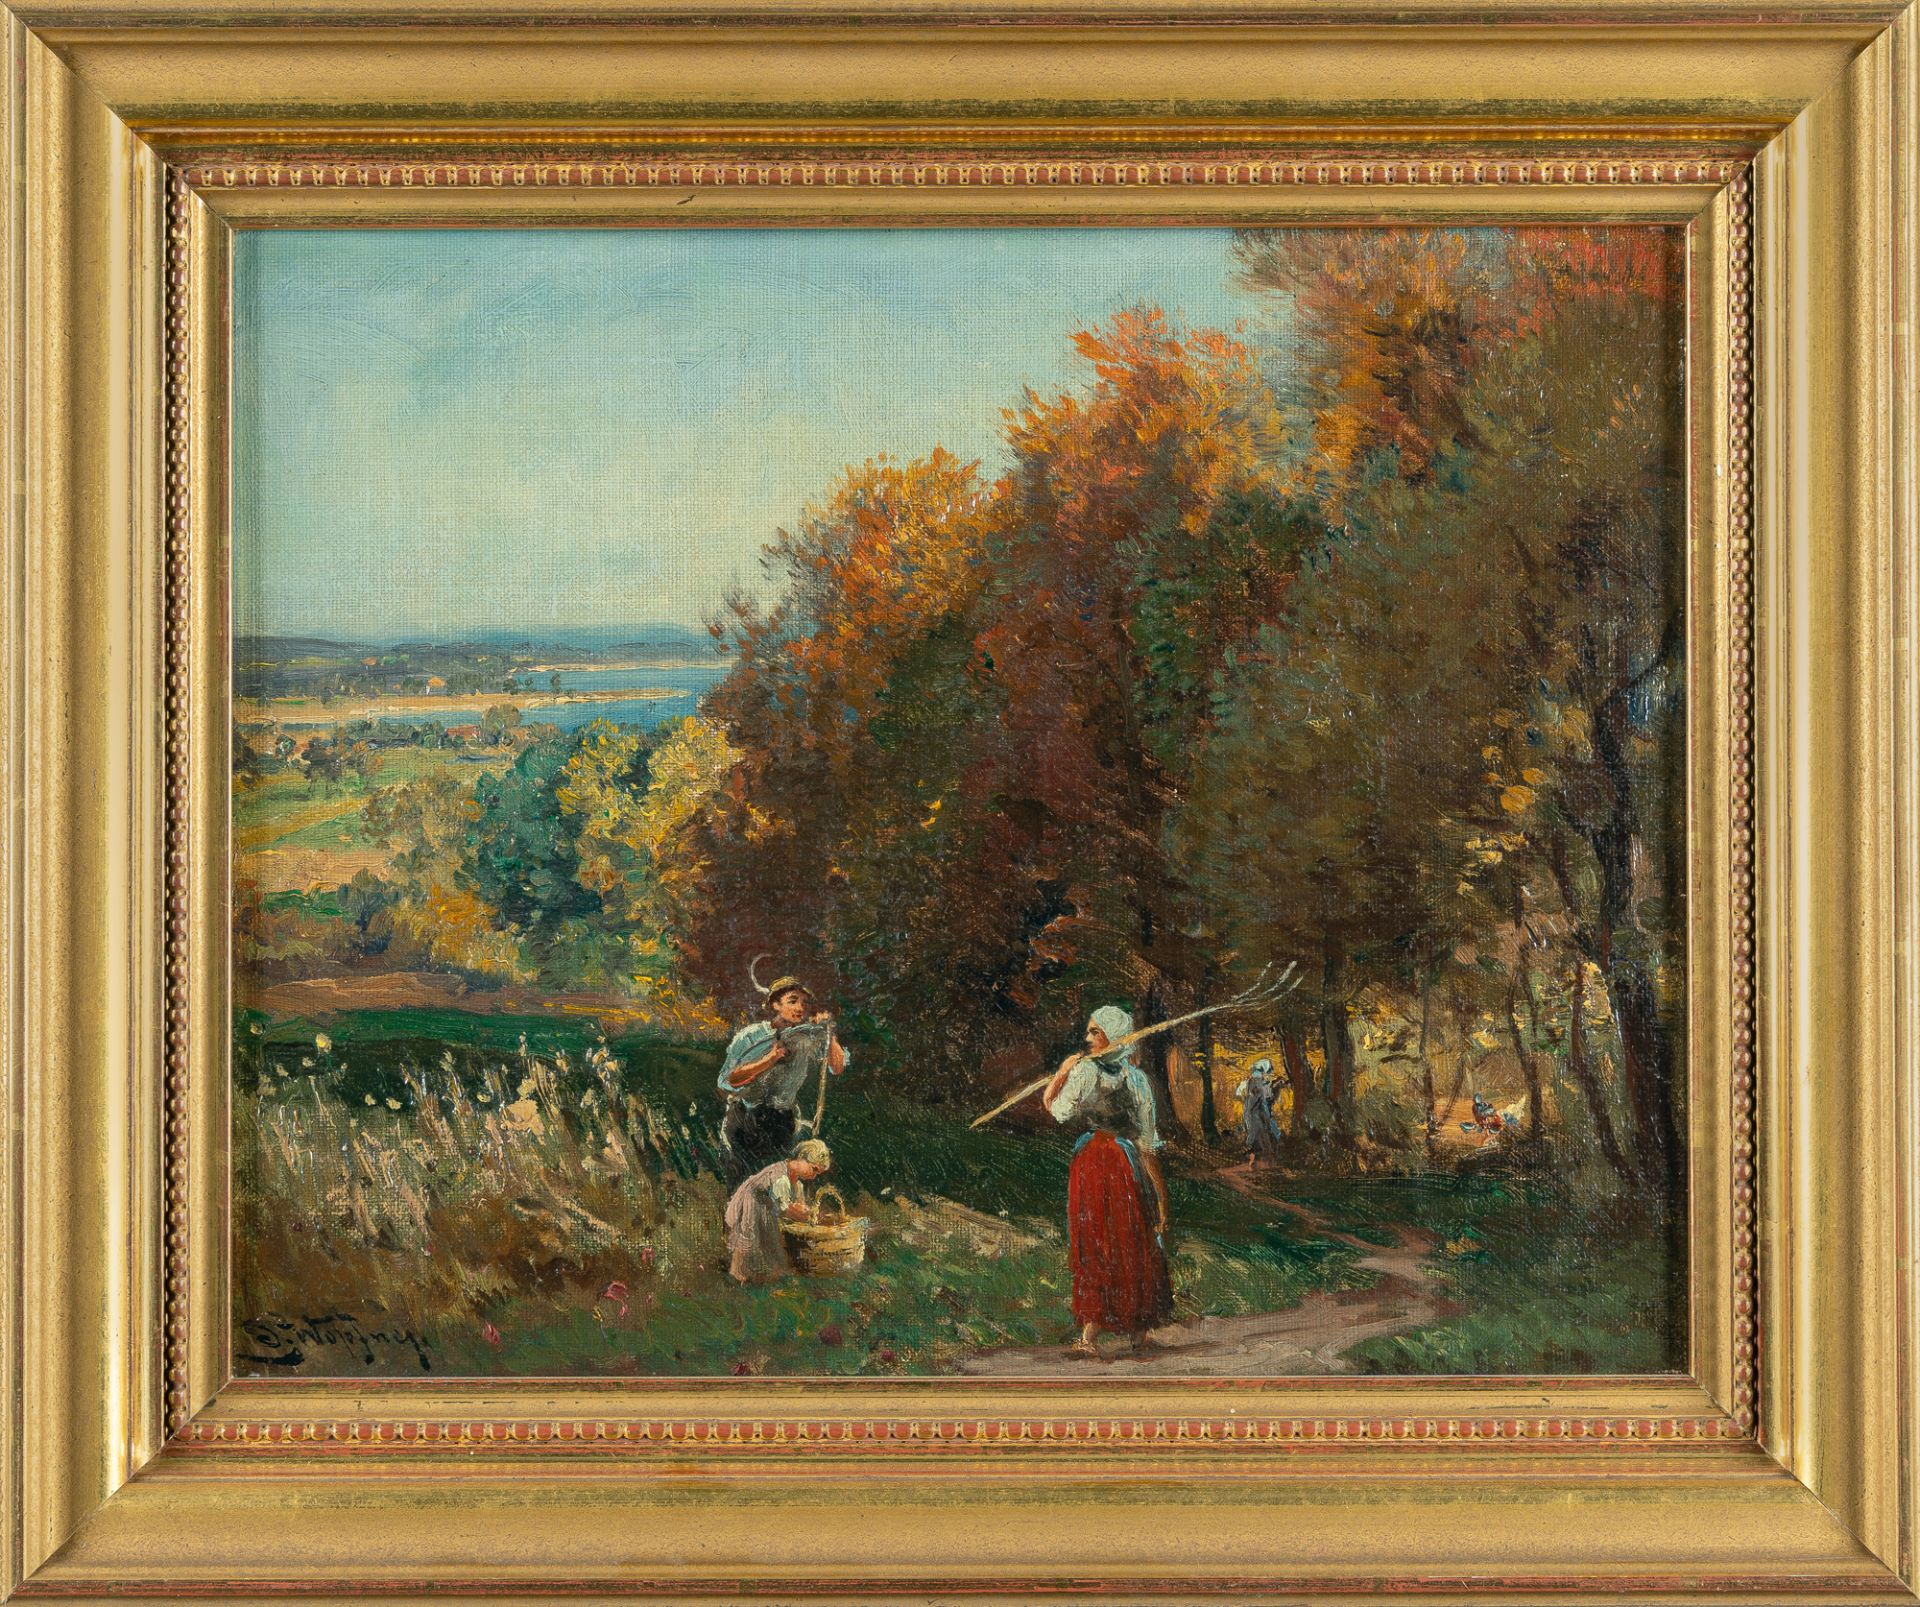 Josef Wopfner, Mower on the banks of the Chiemsee.Oil on canvas, laid down on panel. (After 1900). - Image 4 of 4